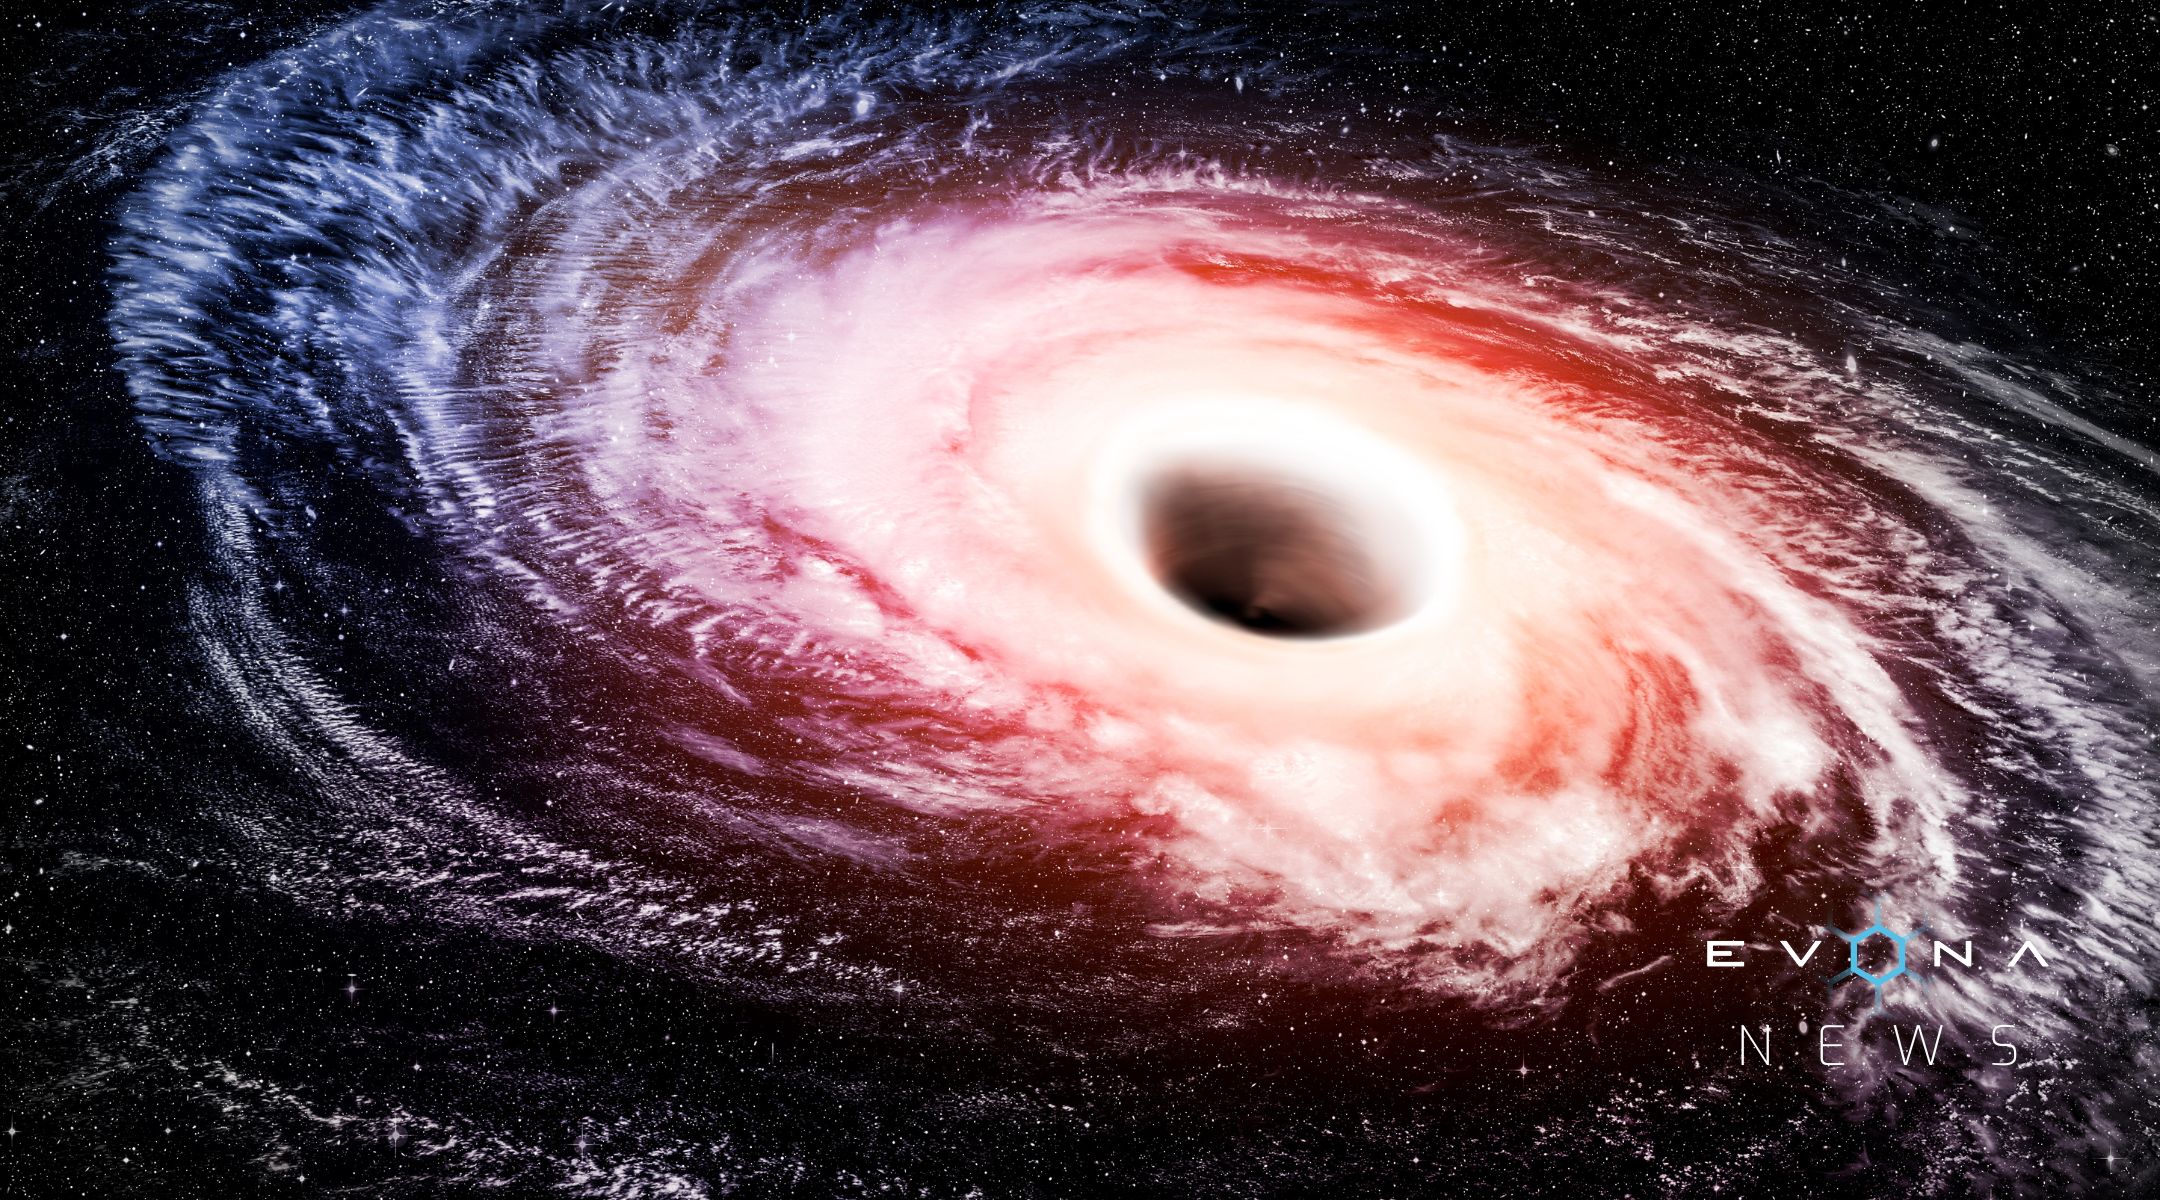 UK Astronomers Discover Ultramassive Black Hole